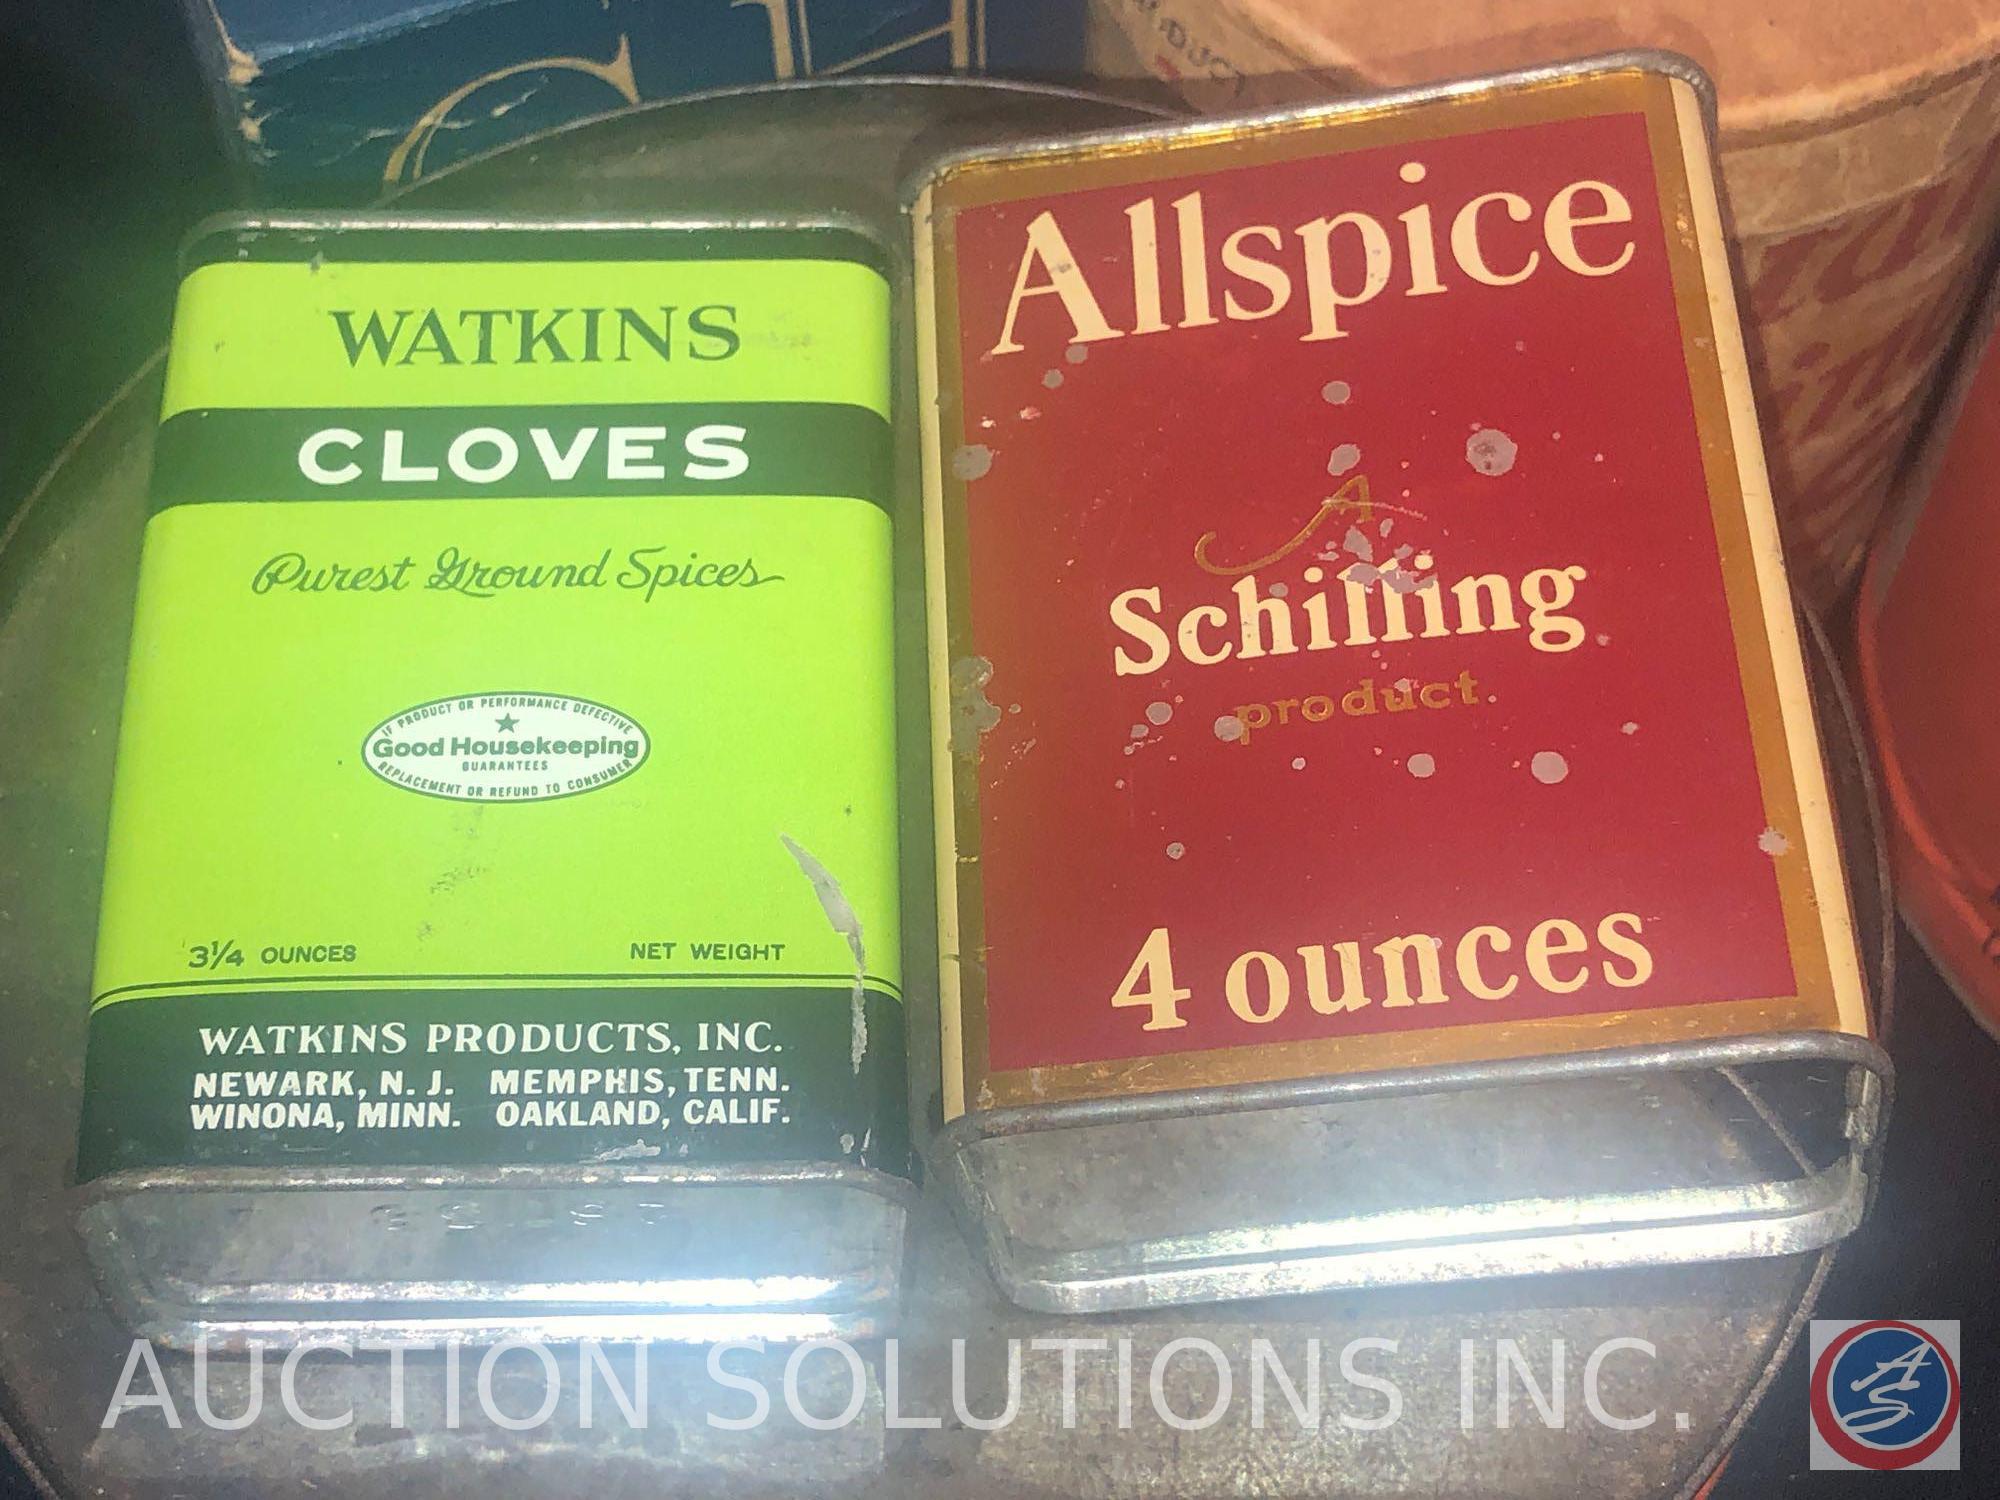 Nabisco Premium Saltine Cracker Tin (Empty), A Schilling Product All Spice (Partially Used), Watkins